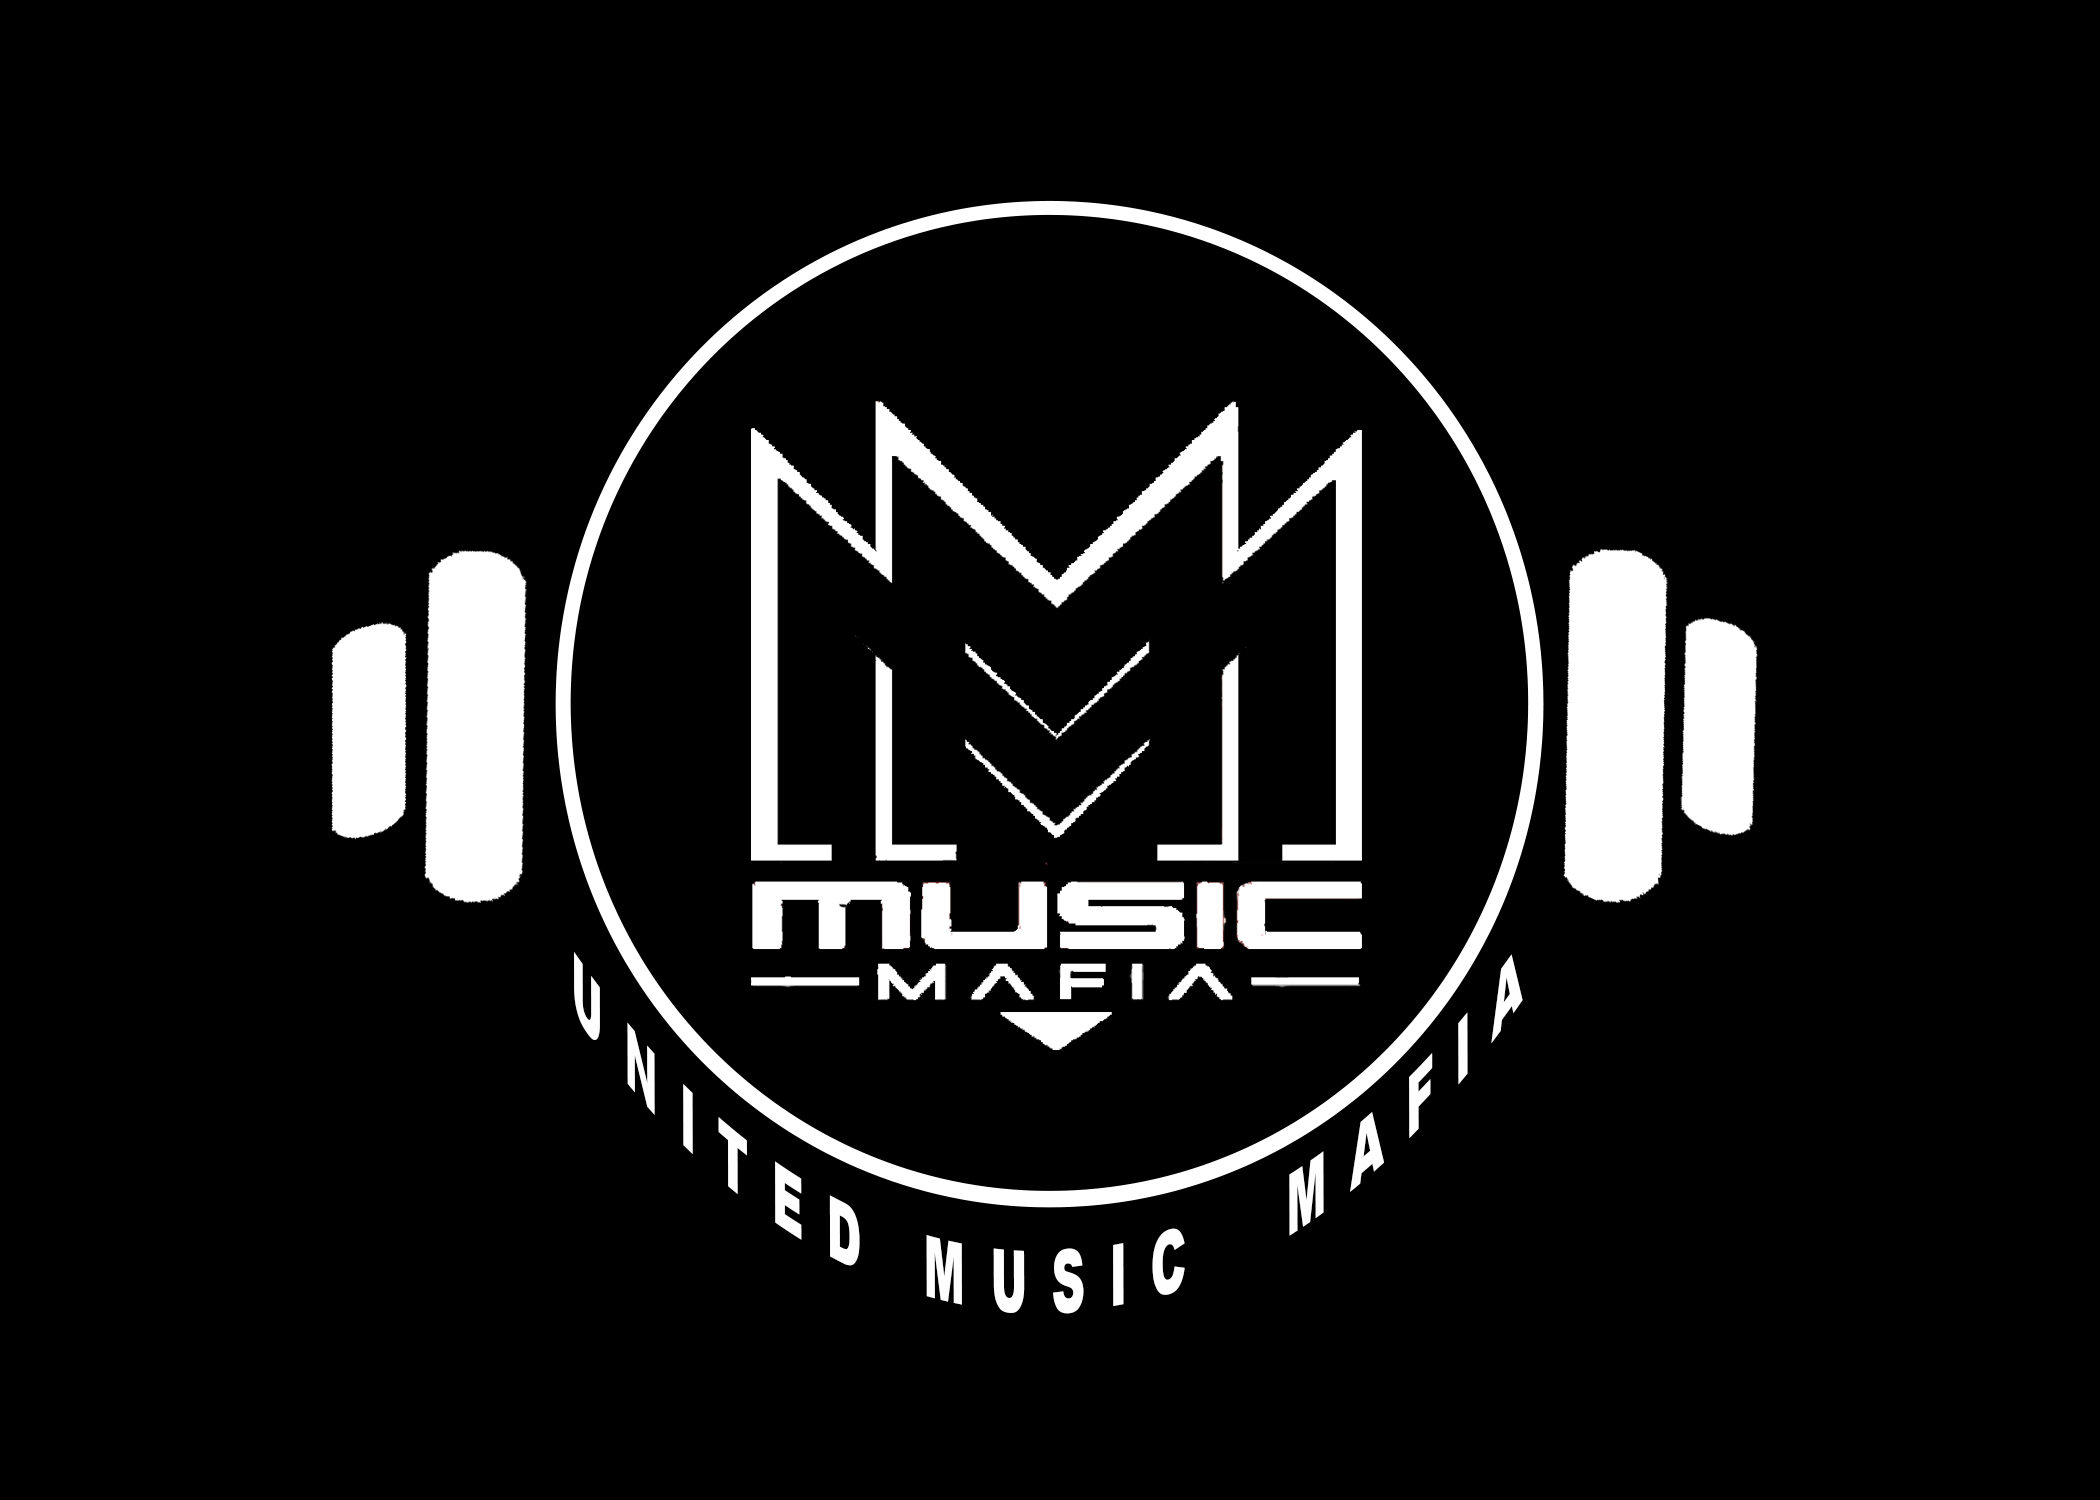 The United Music Mafia (UMM) commits to bringing fresh talent and faces to the Industry